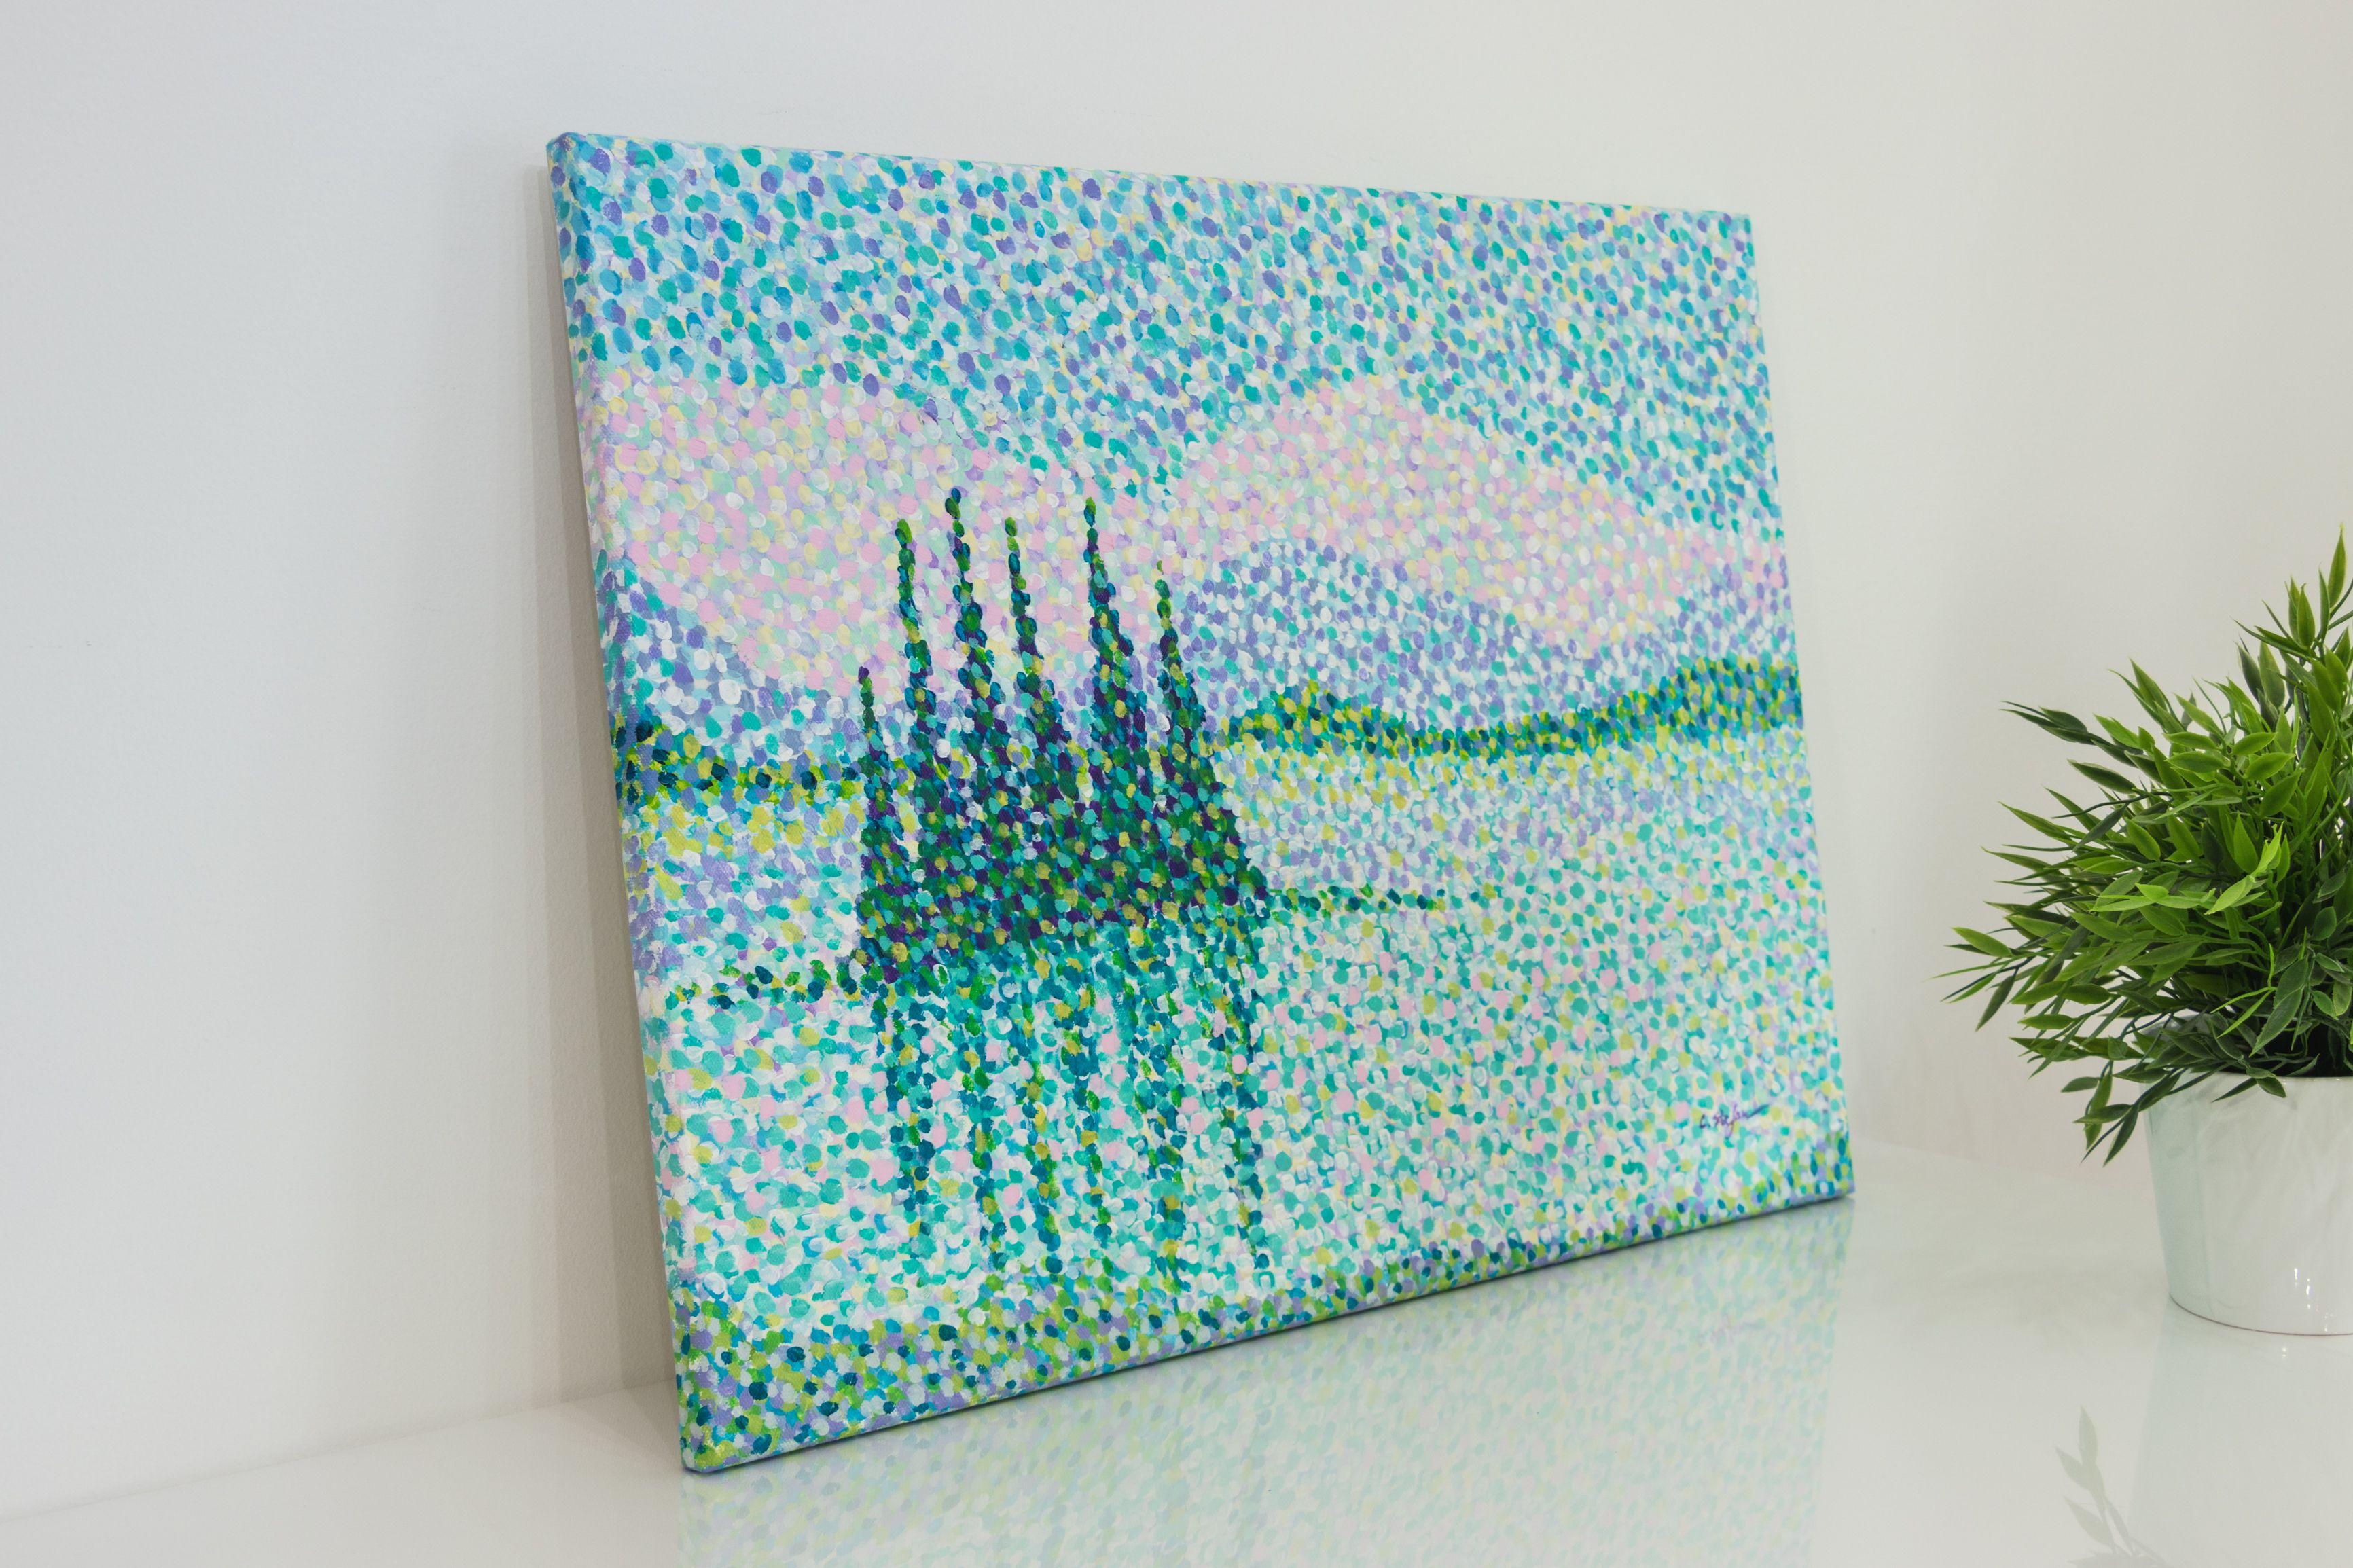 Lake in the Rockies    This contemporary painting is executed in an impressionistic style and by using the pointillism technique.    The landscape is inspired from a lake seen in the Rocky Mountains during my trip last year.    The painting is